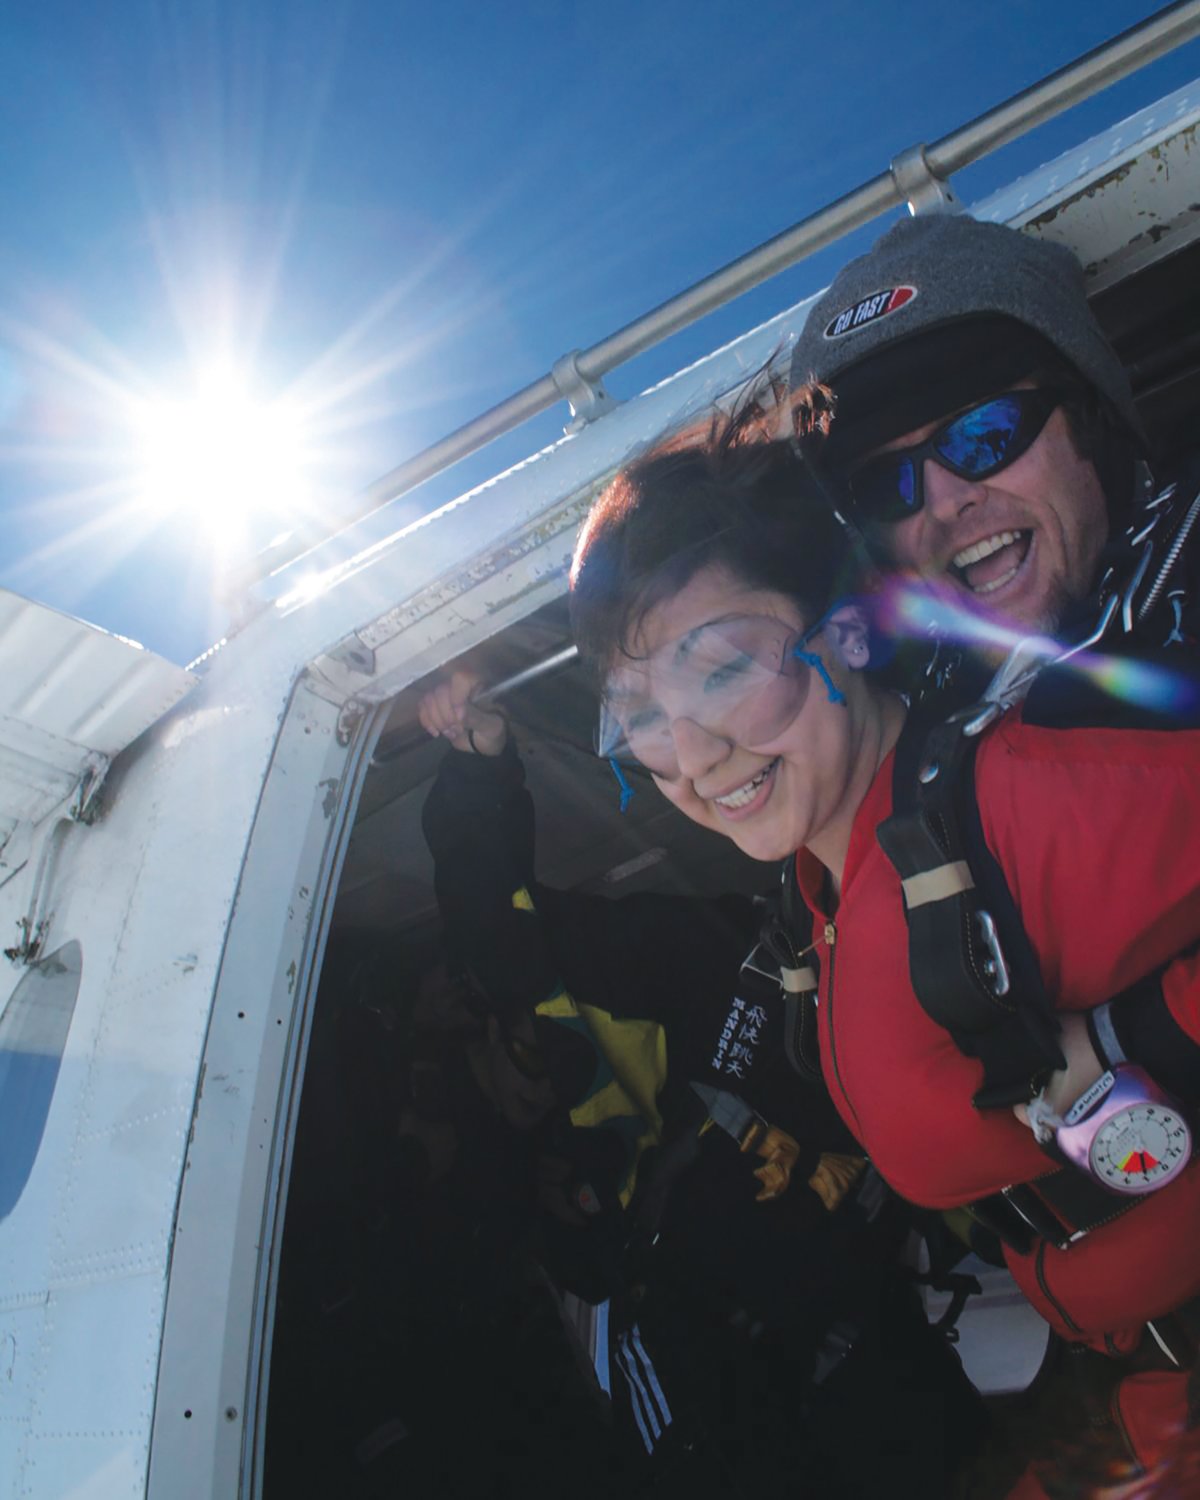 Skydiving lessons are available at Skydive Spaceland